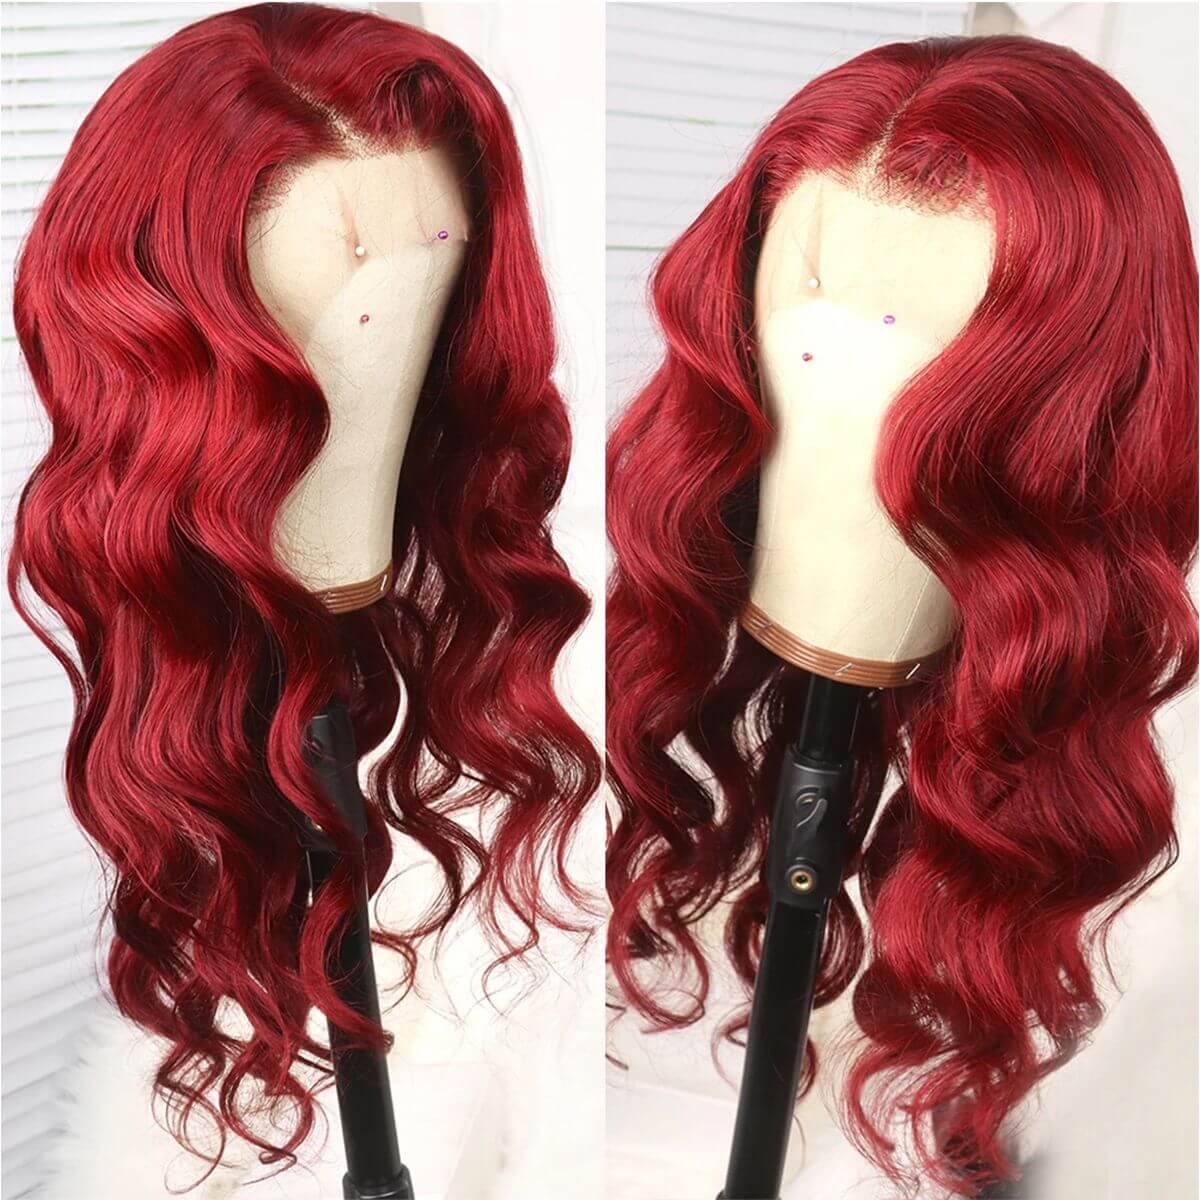 red body front wigs,13×6 red body wave lace frontal wigs,13×6 red body lace frontal wigs,red body hair front wig,cheap red body hair front wig